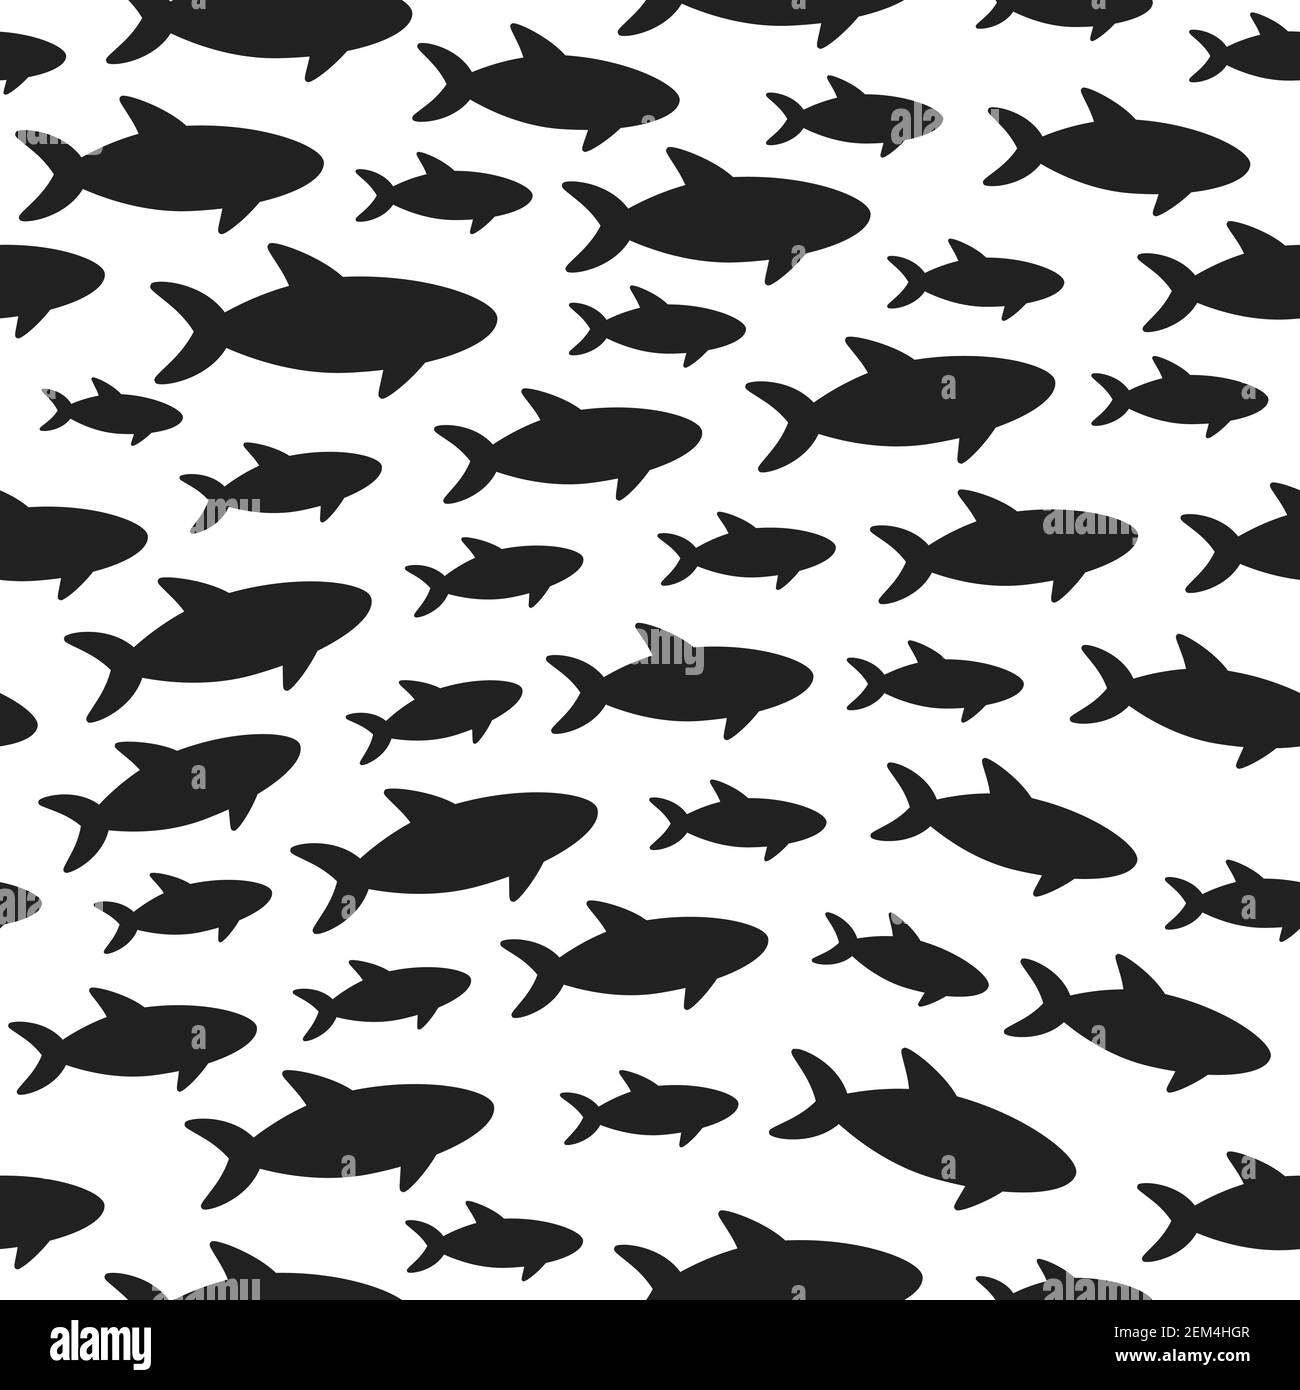 Silhouettes school of fish with marine life of various sizes swimming fish seamless pattern flat style design vector illustration. Colony of big and s Stock Vector